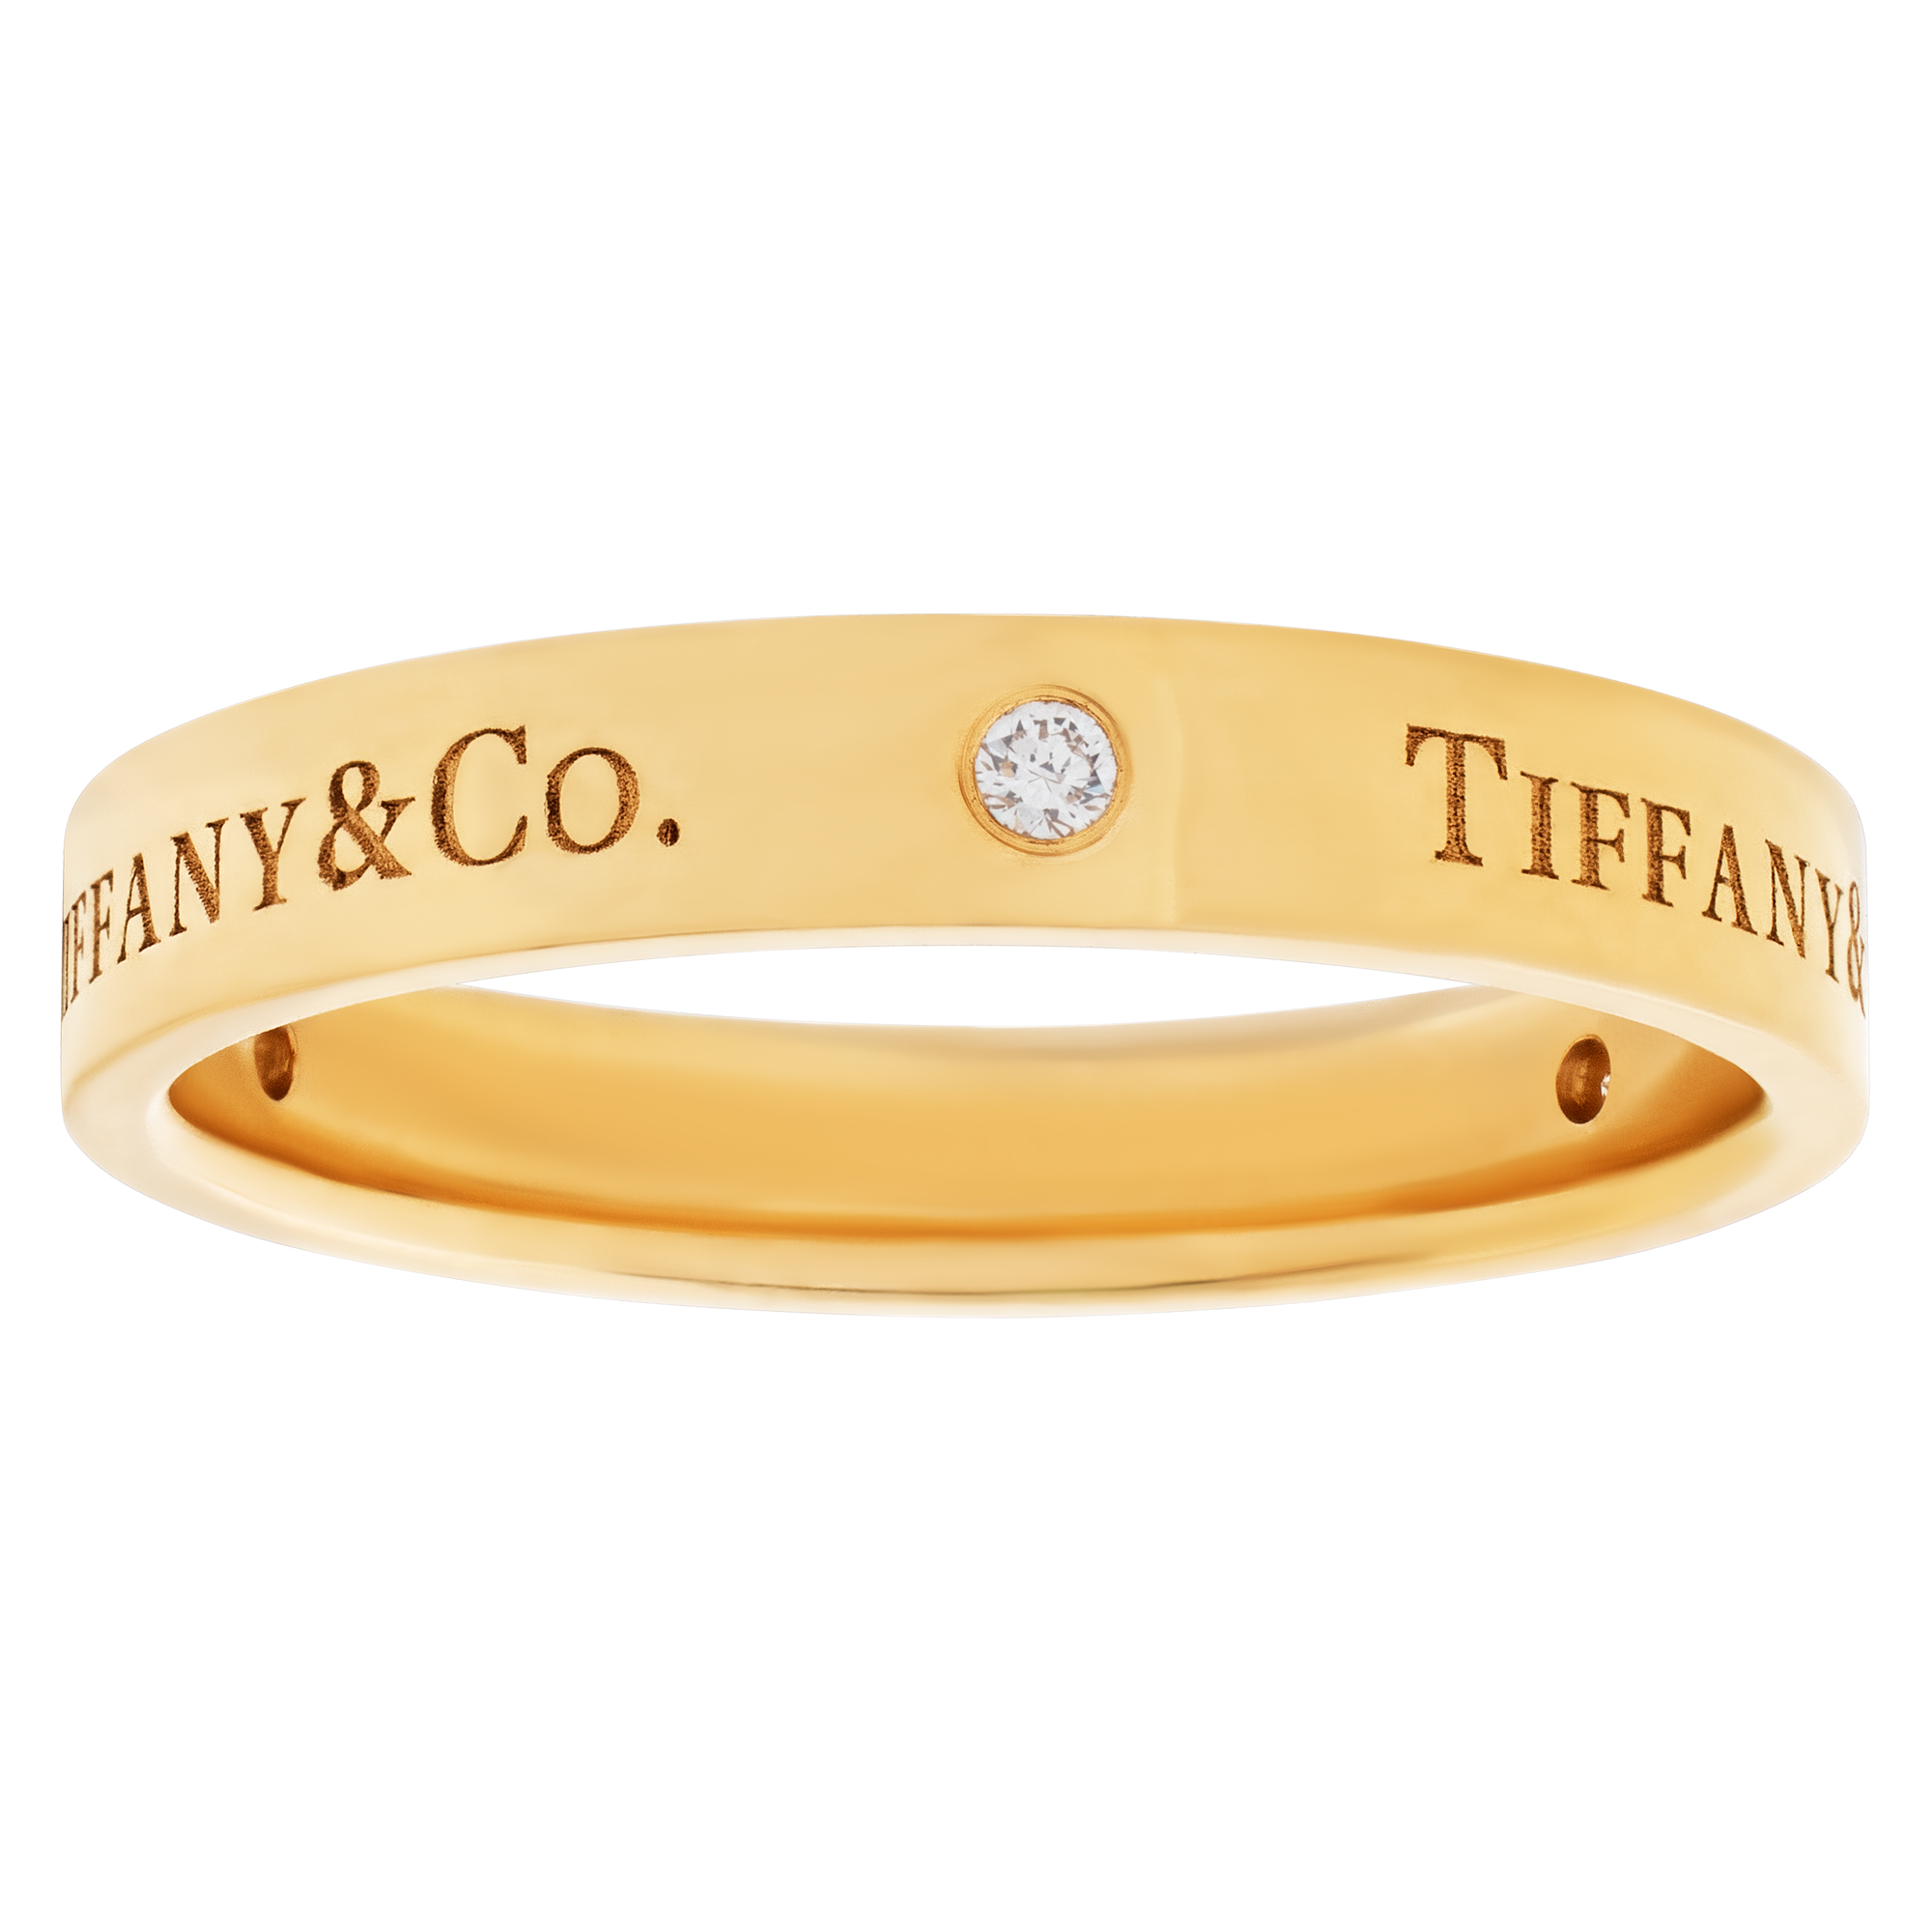 Tiffany & Co. Band with 3 diamonds in 18k yellow gold image 1